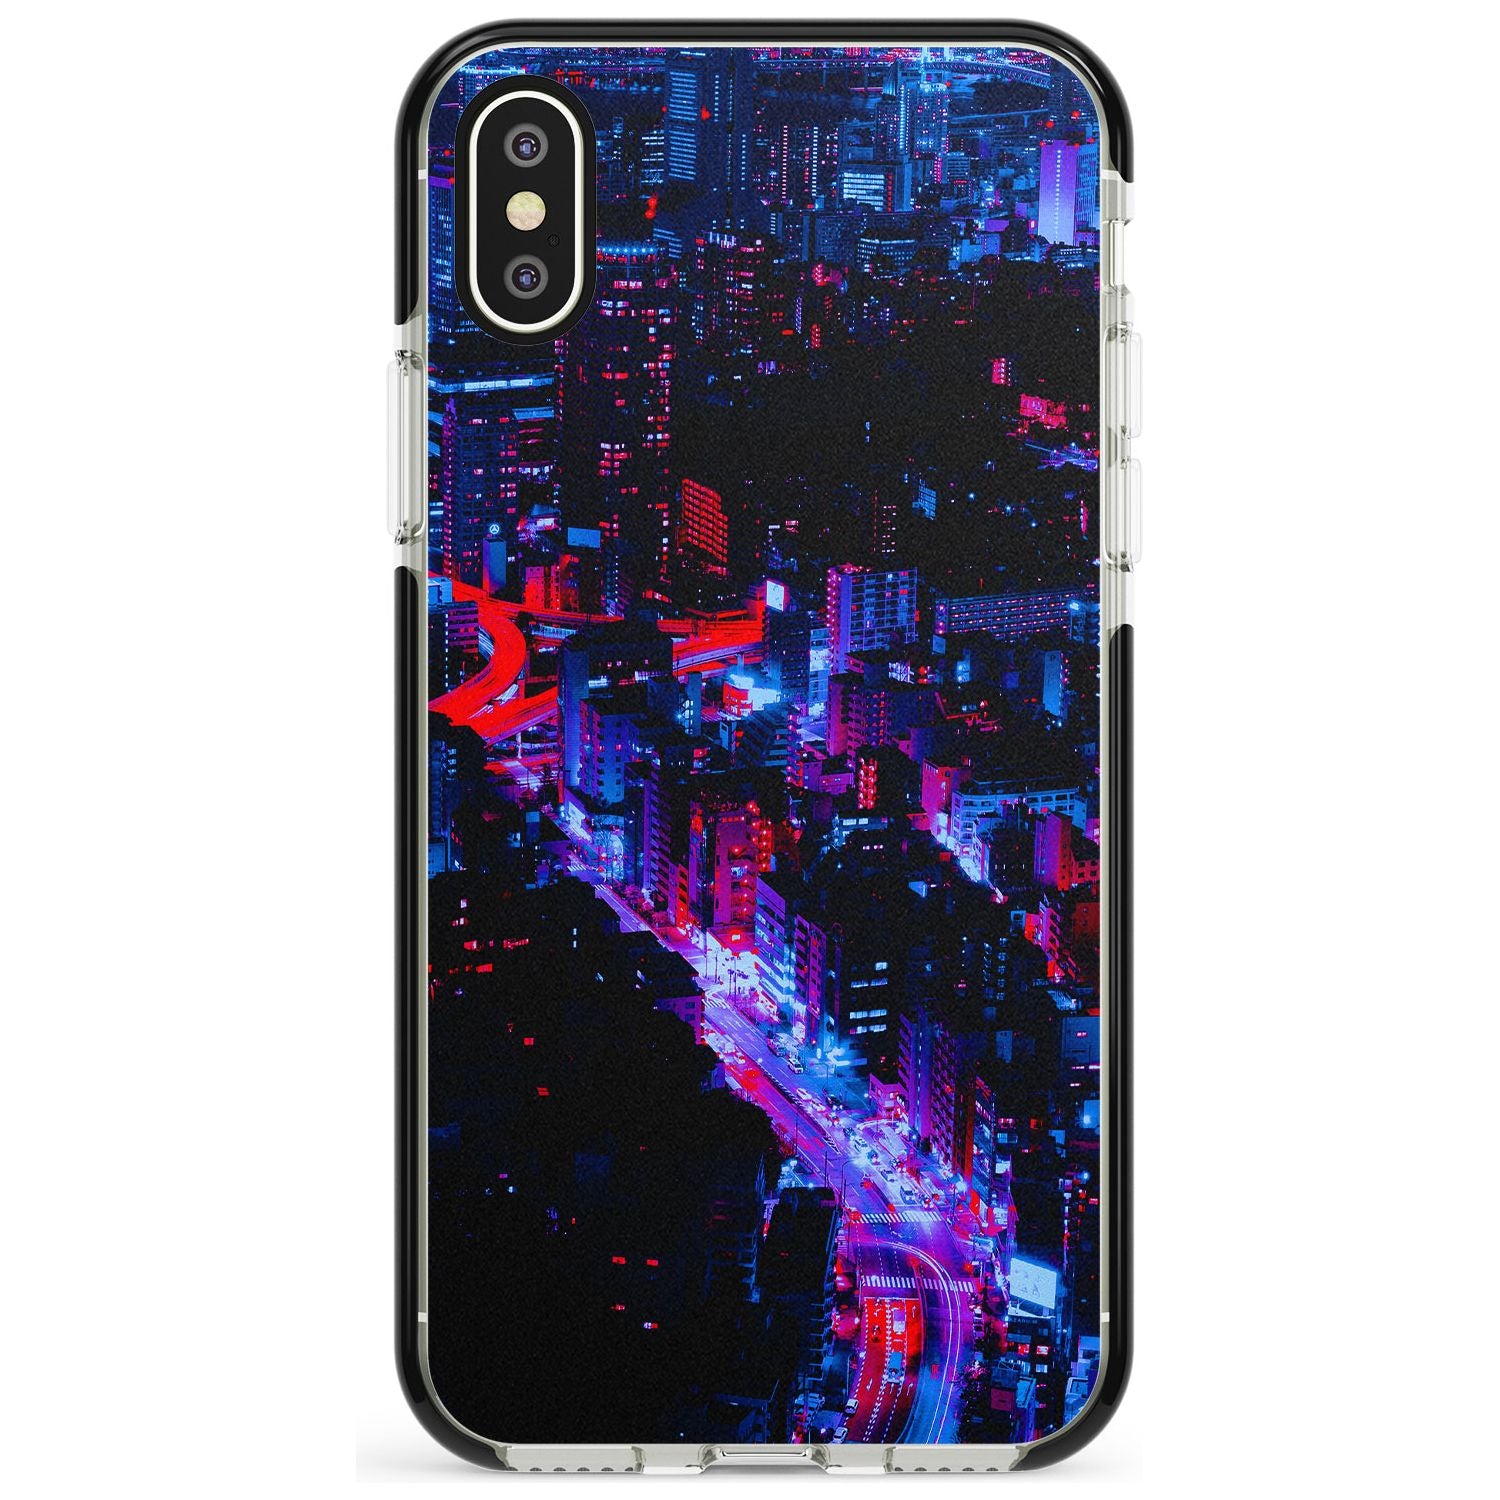 Arial City View - Neon Cities Photographs Black Impact Phone Case for iPhone X XS Max XR